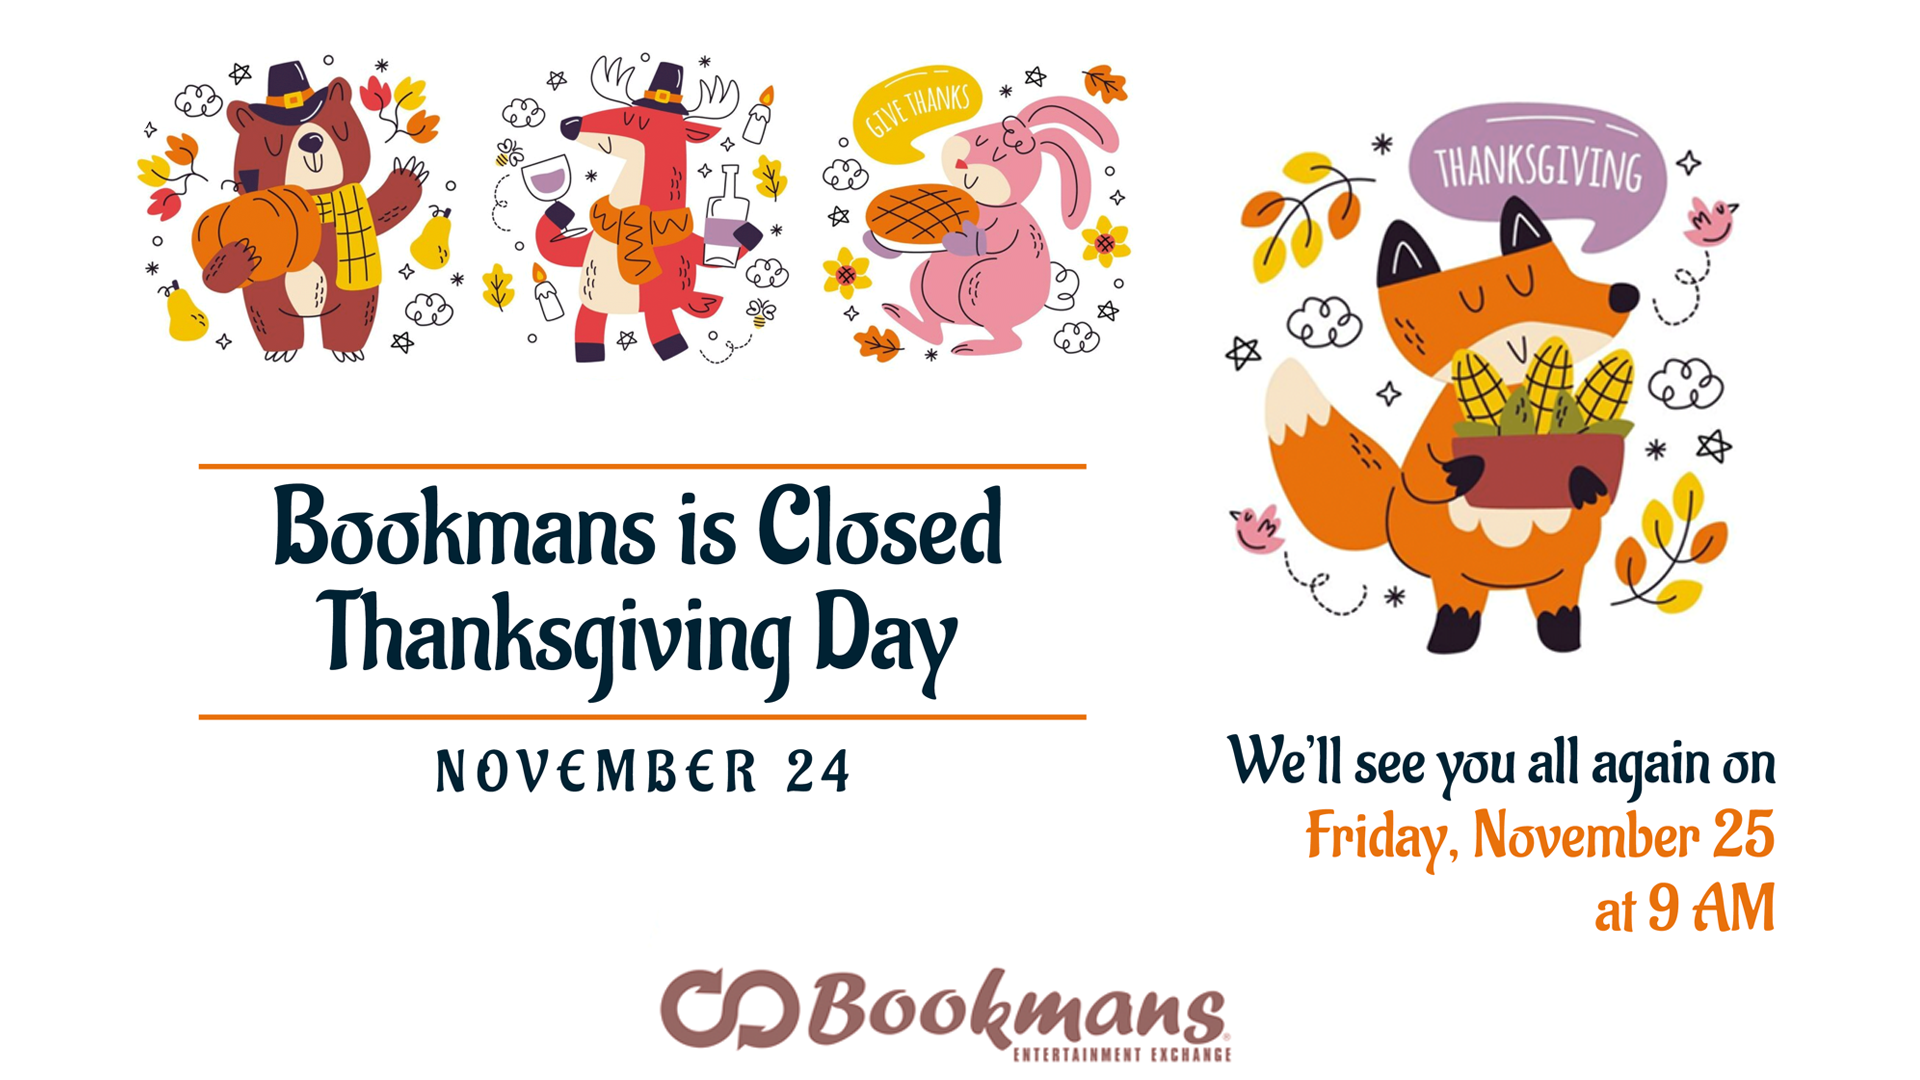 Thanksgiving animal illustrations on a white background with text that reads Bookmans is Closed Thanksgiving Day and will reopen at 9 AM on Friday, November 25